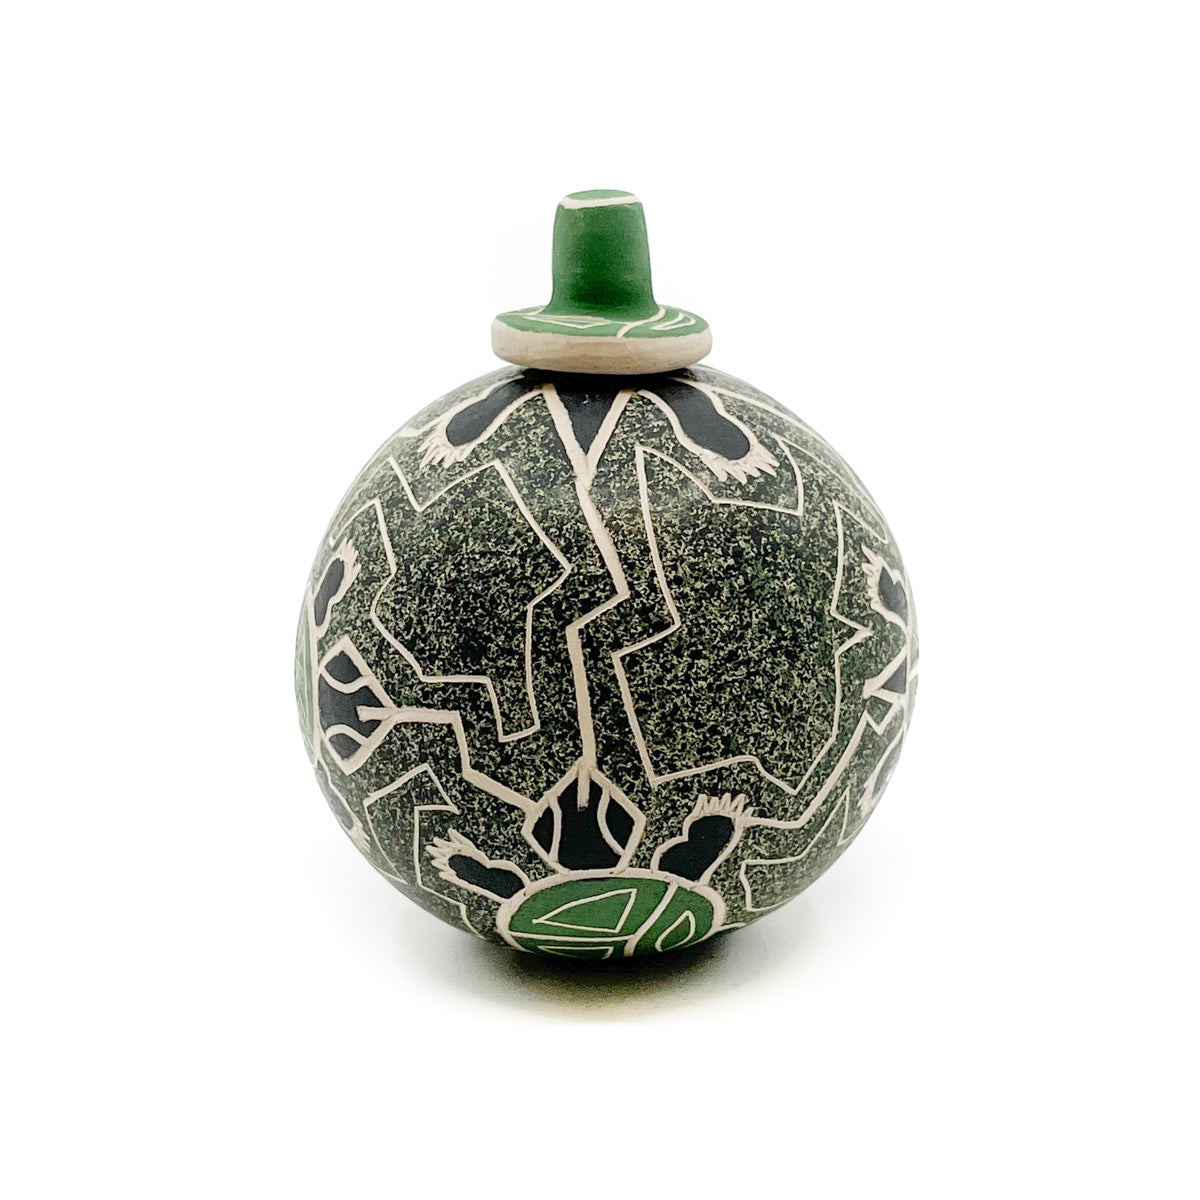 Lidded Green Seed Pot with Turtles